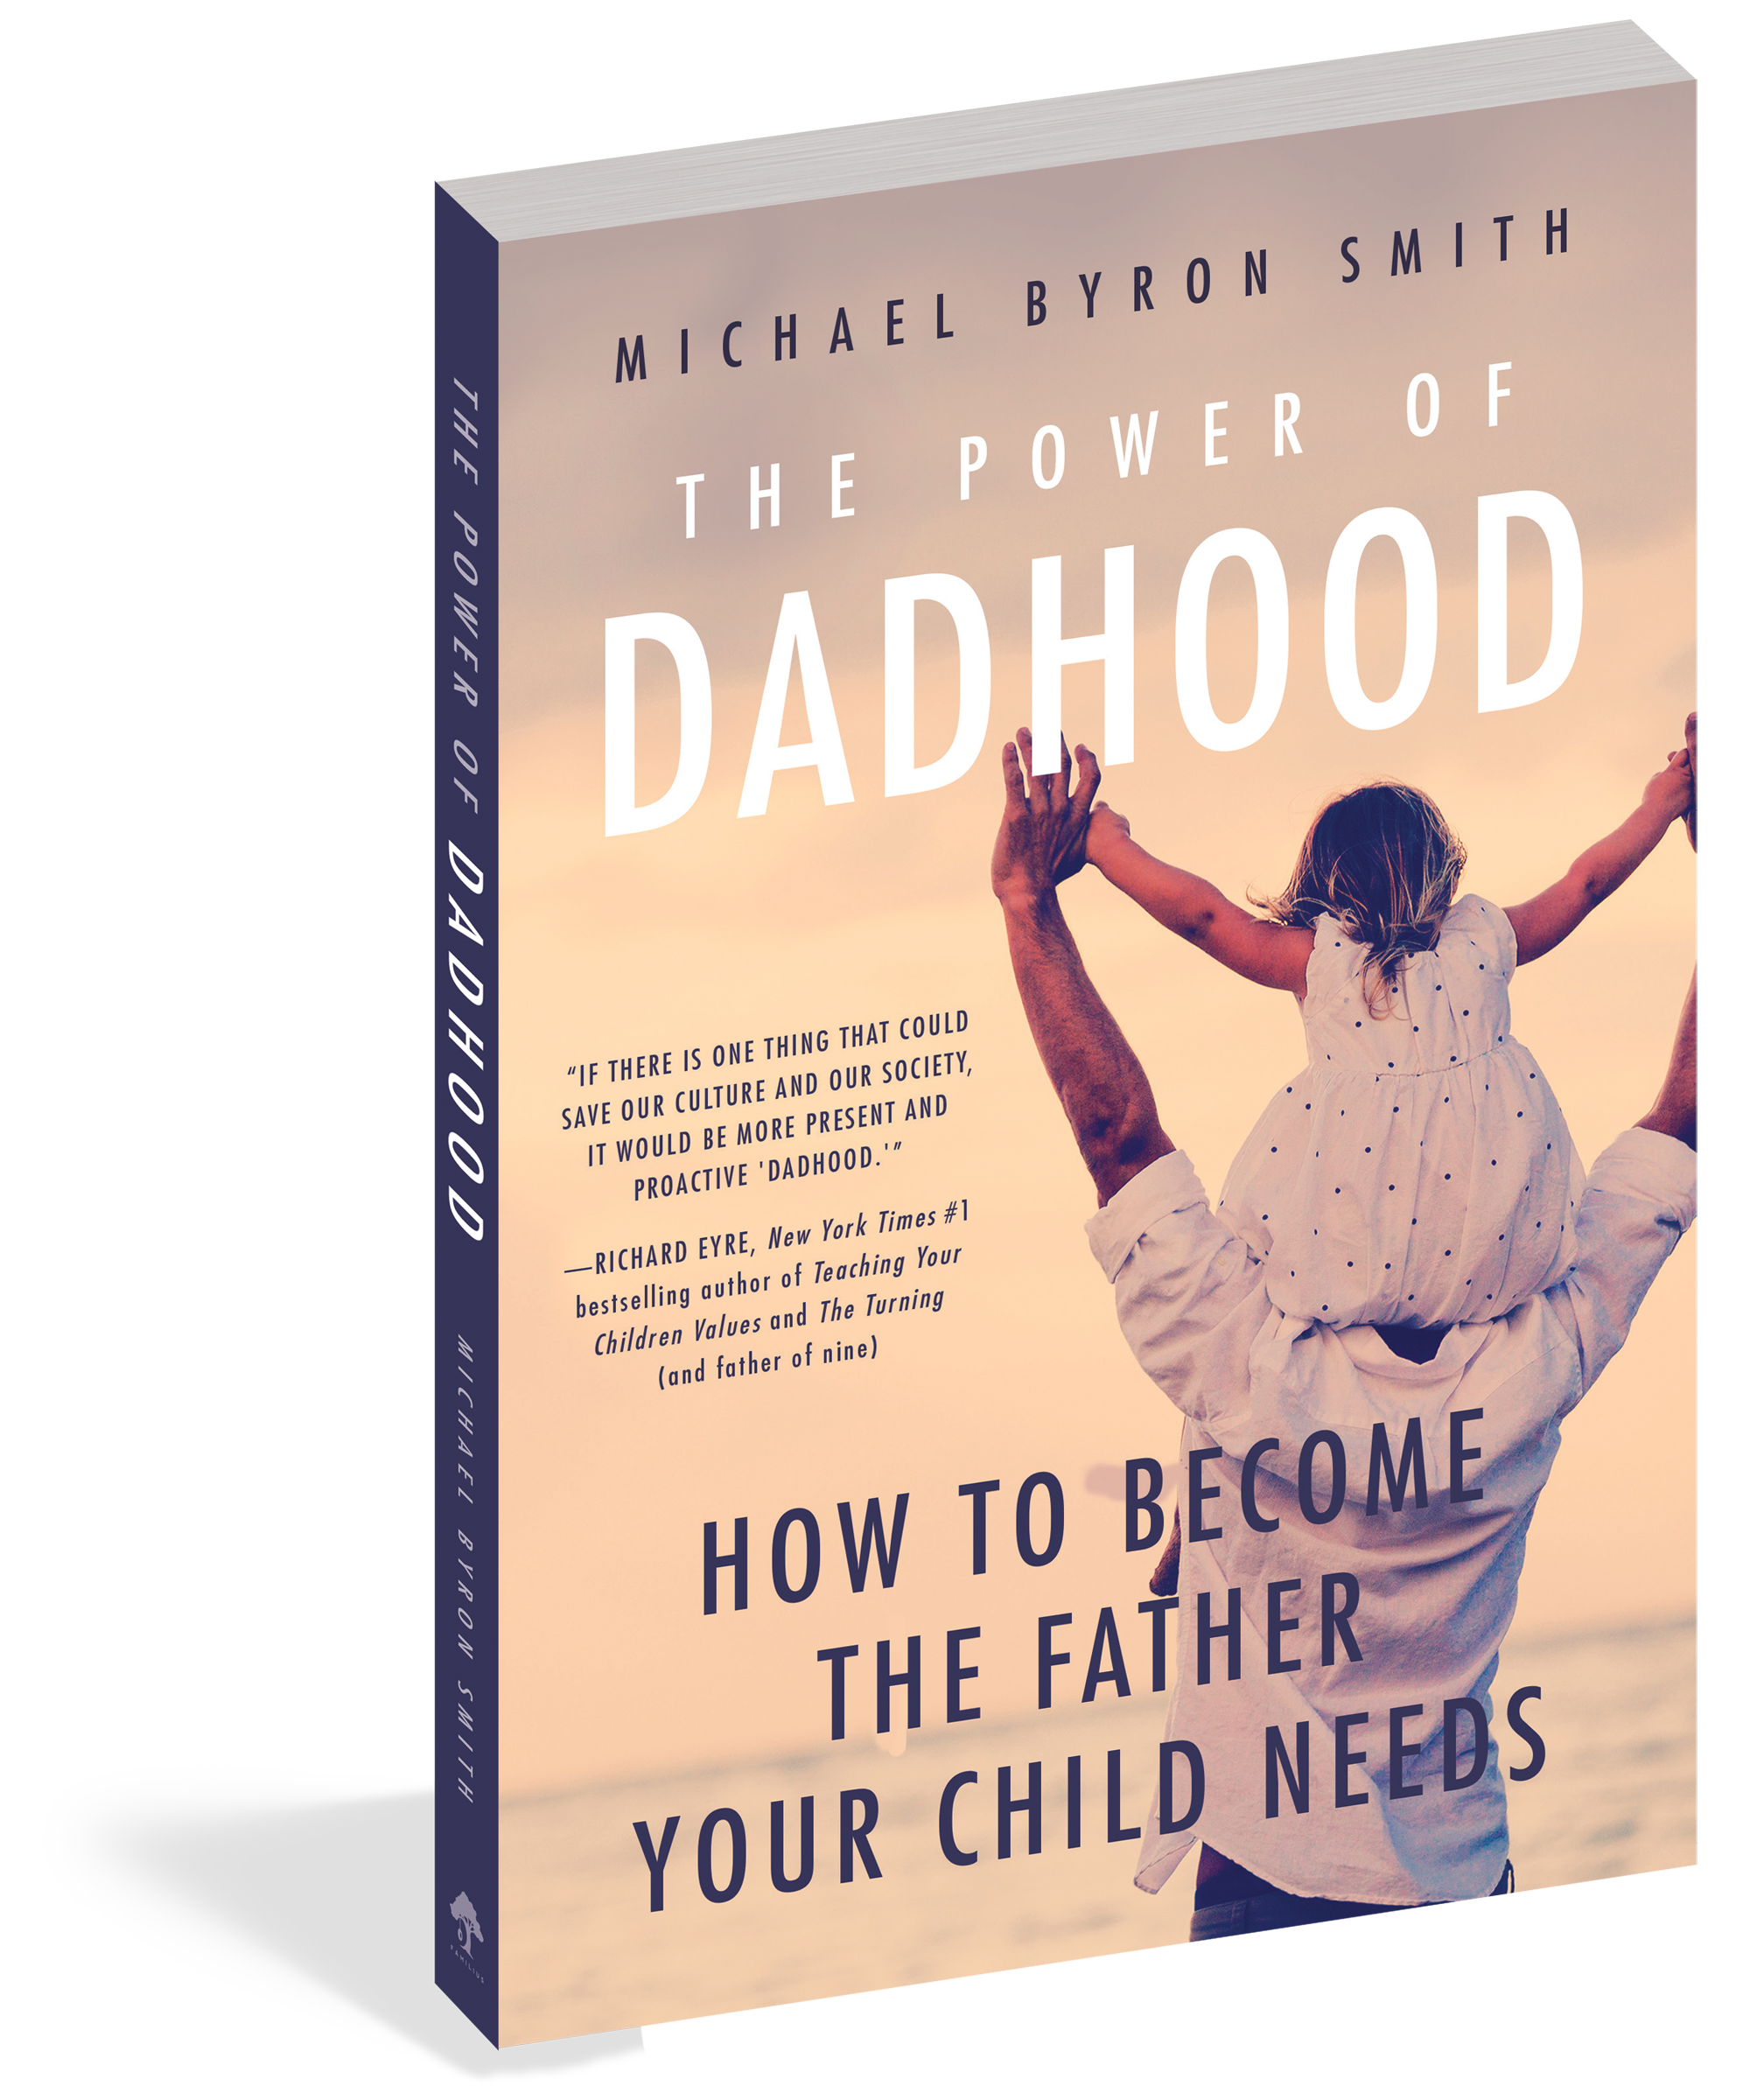 The cover of the book The Power of Dadhood.